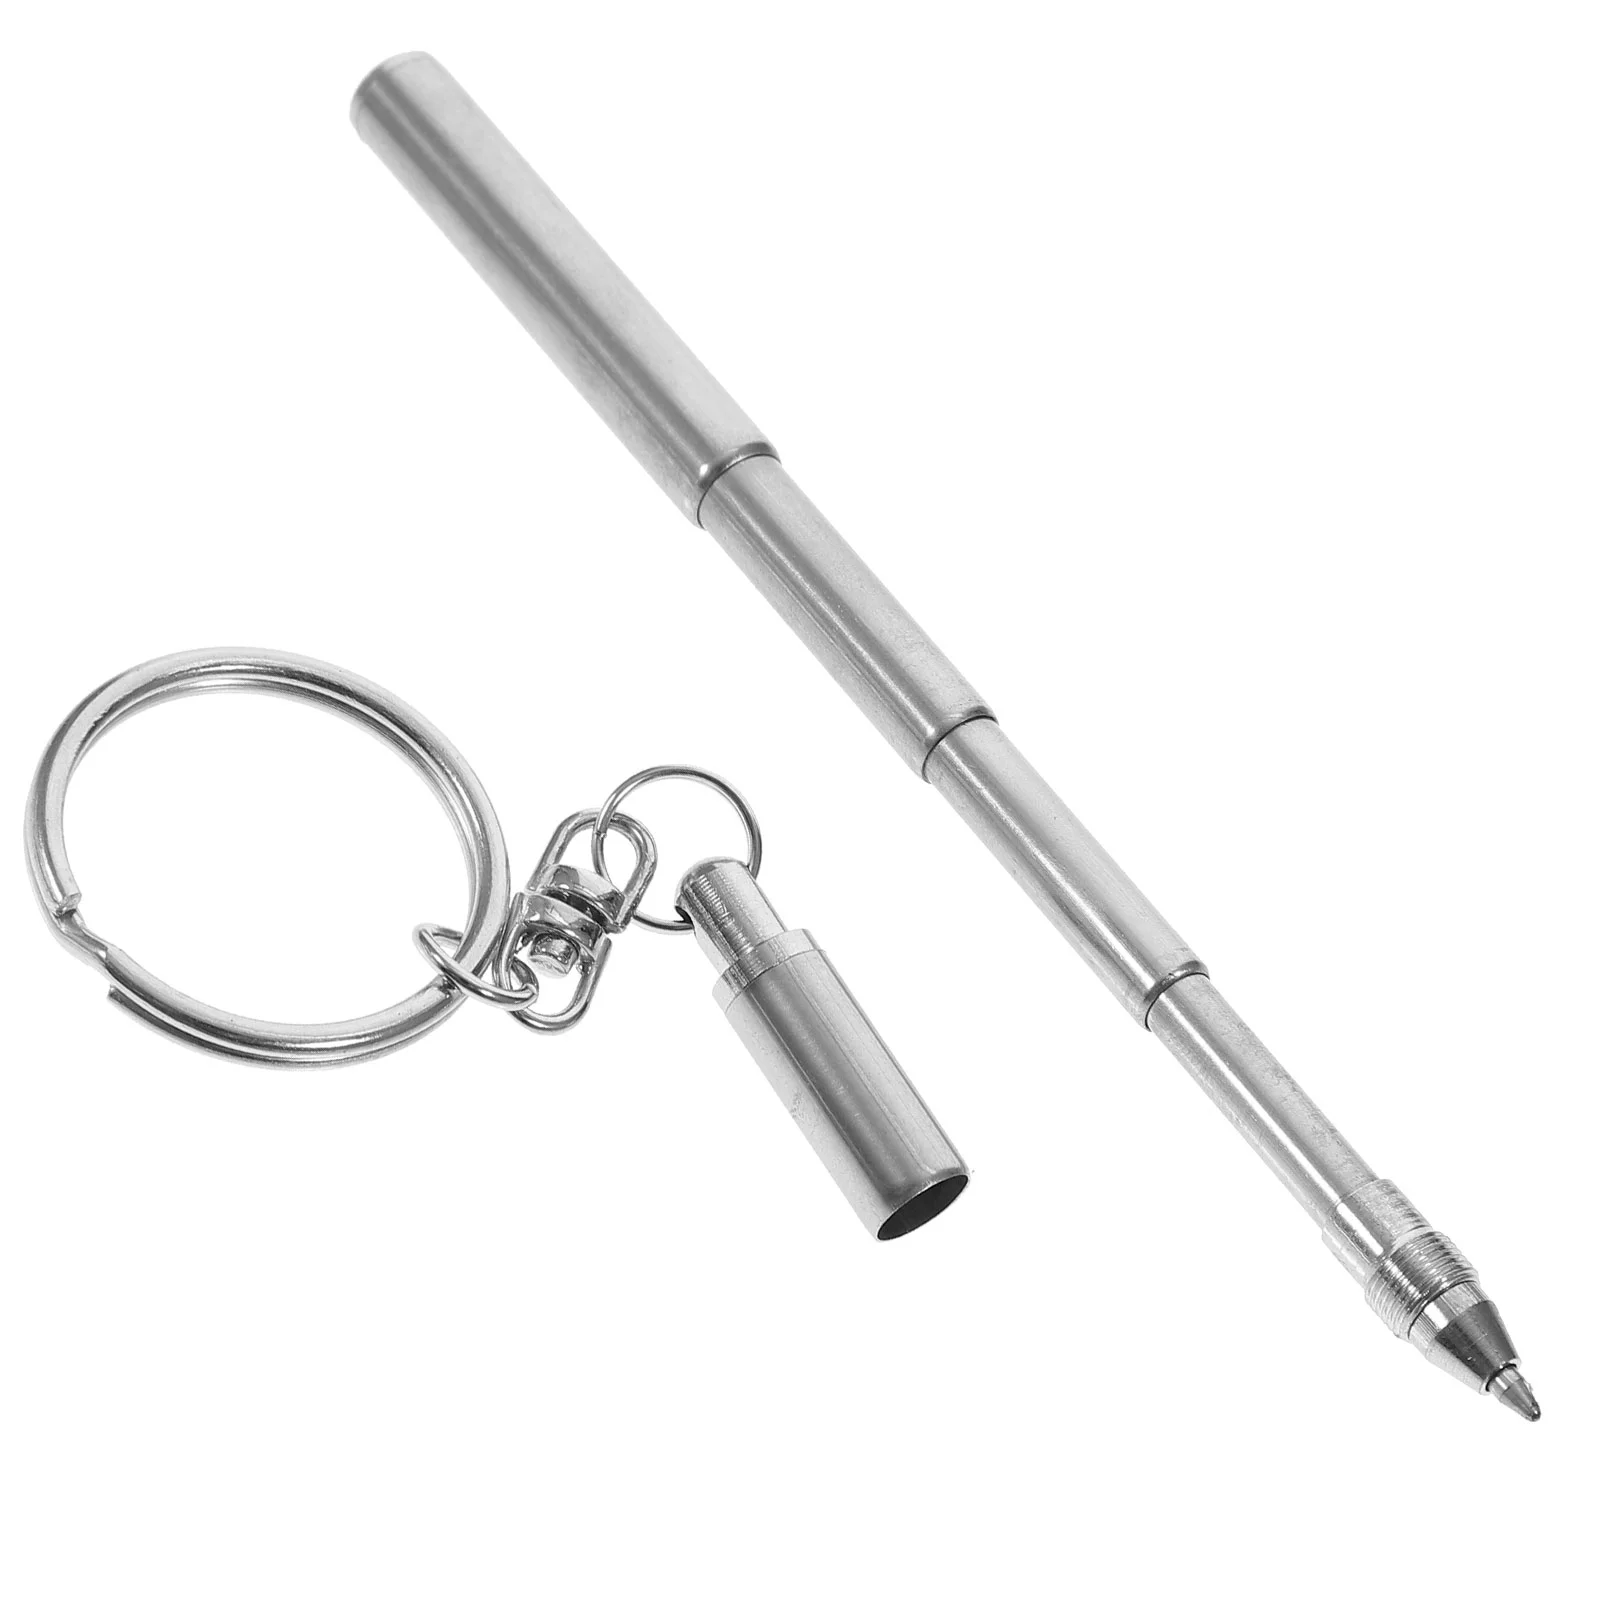 Retractable Pen Shape Keychain Mini Metal Key Ring Portable Stainless Steel Telescopic Ball Point Pens Black Keychain Tools portable velvet diy jewelry tray display box ring bracelet drawer storage case jewelry organizer box earring holder gift boxes